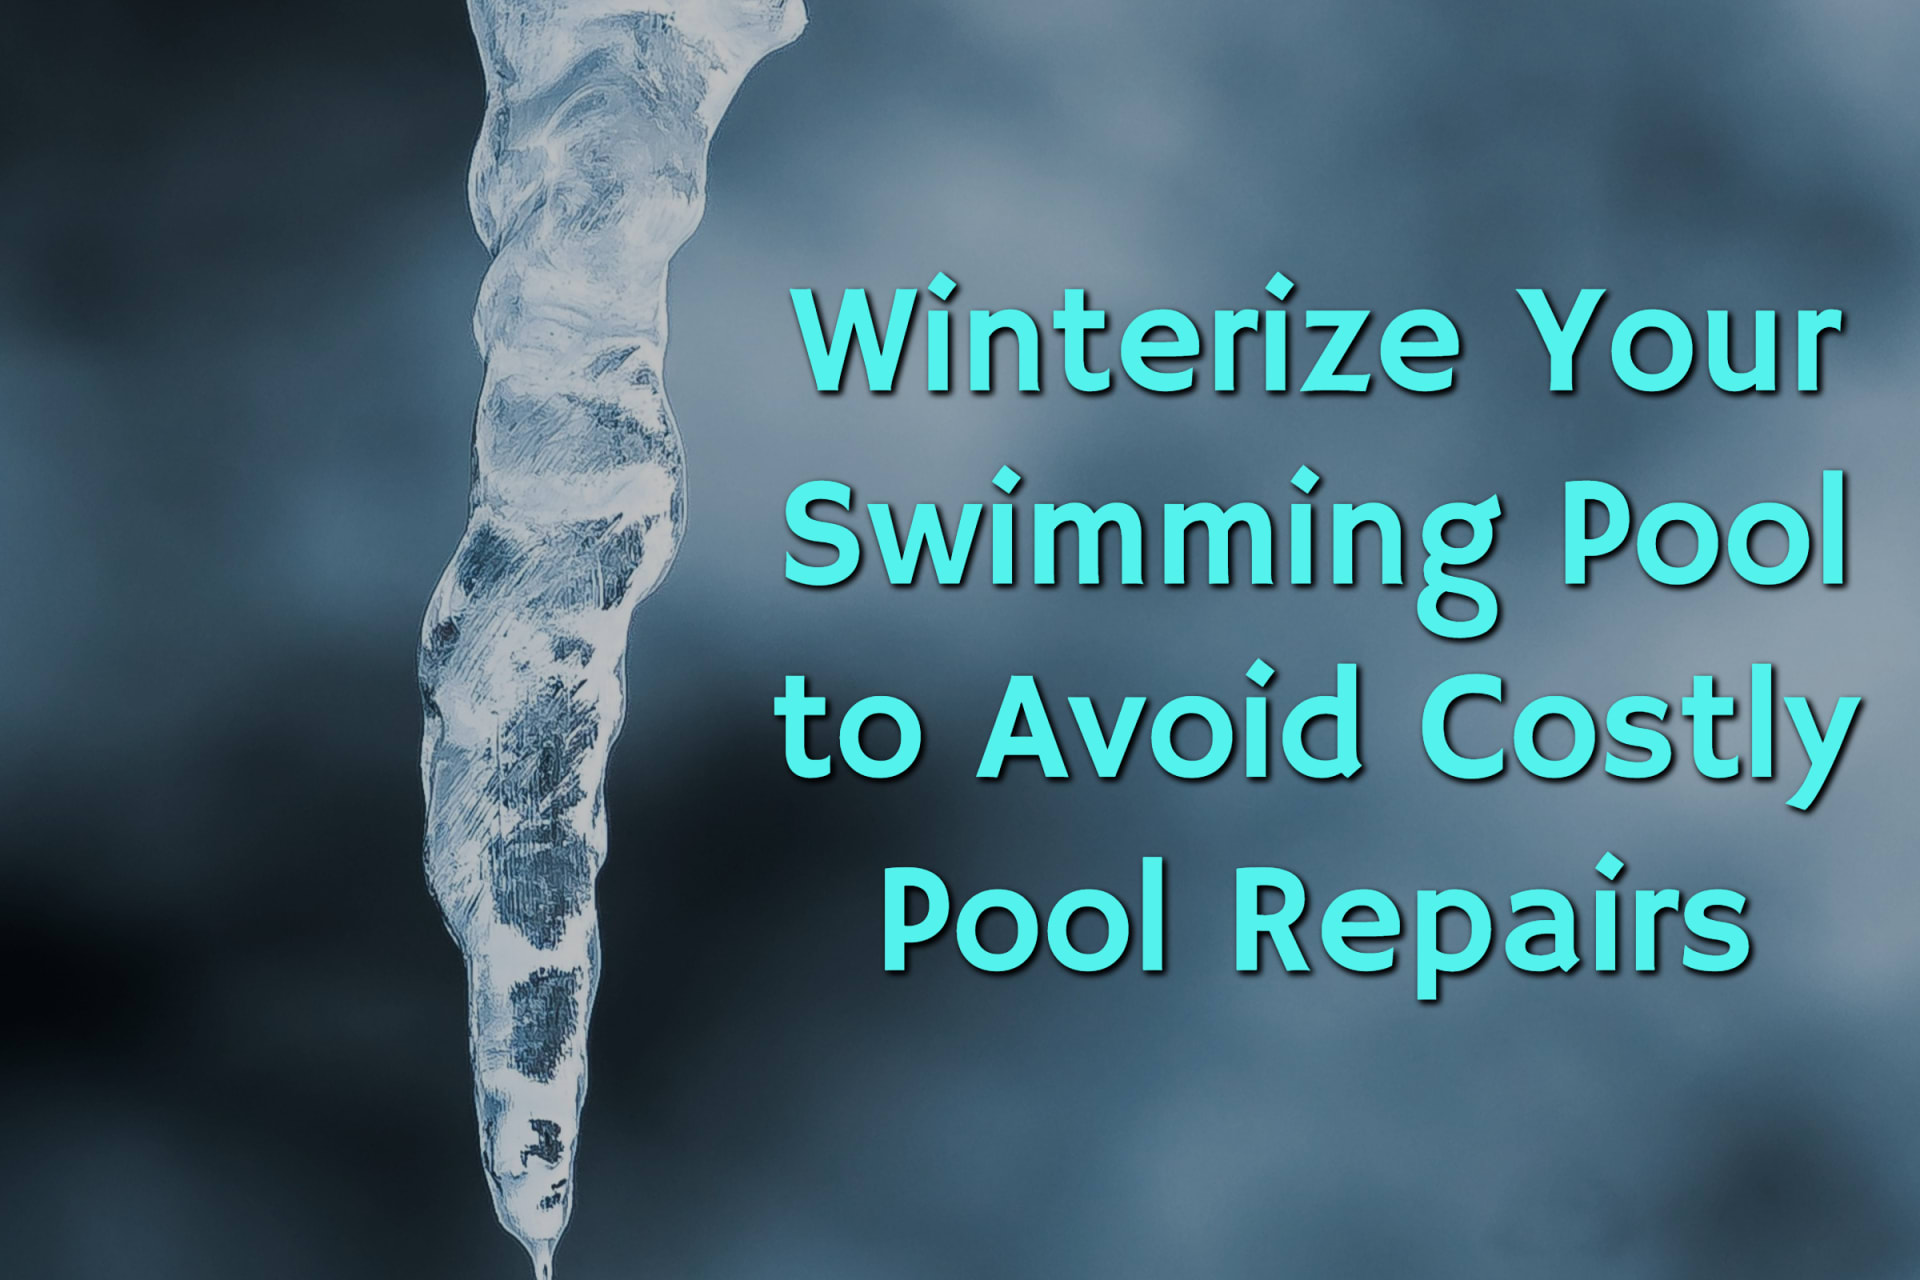 Icicle to remind pool owners to winterize pools and avoid costly pool repair